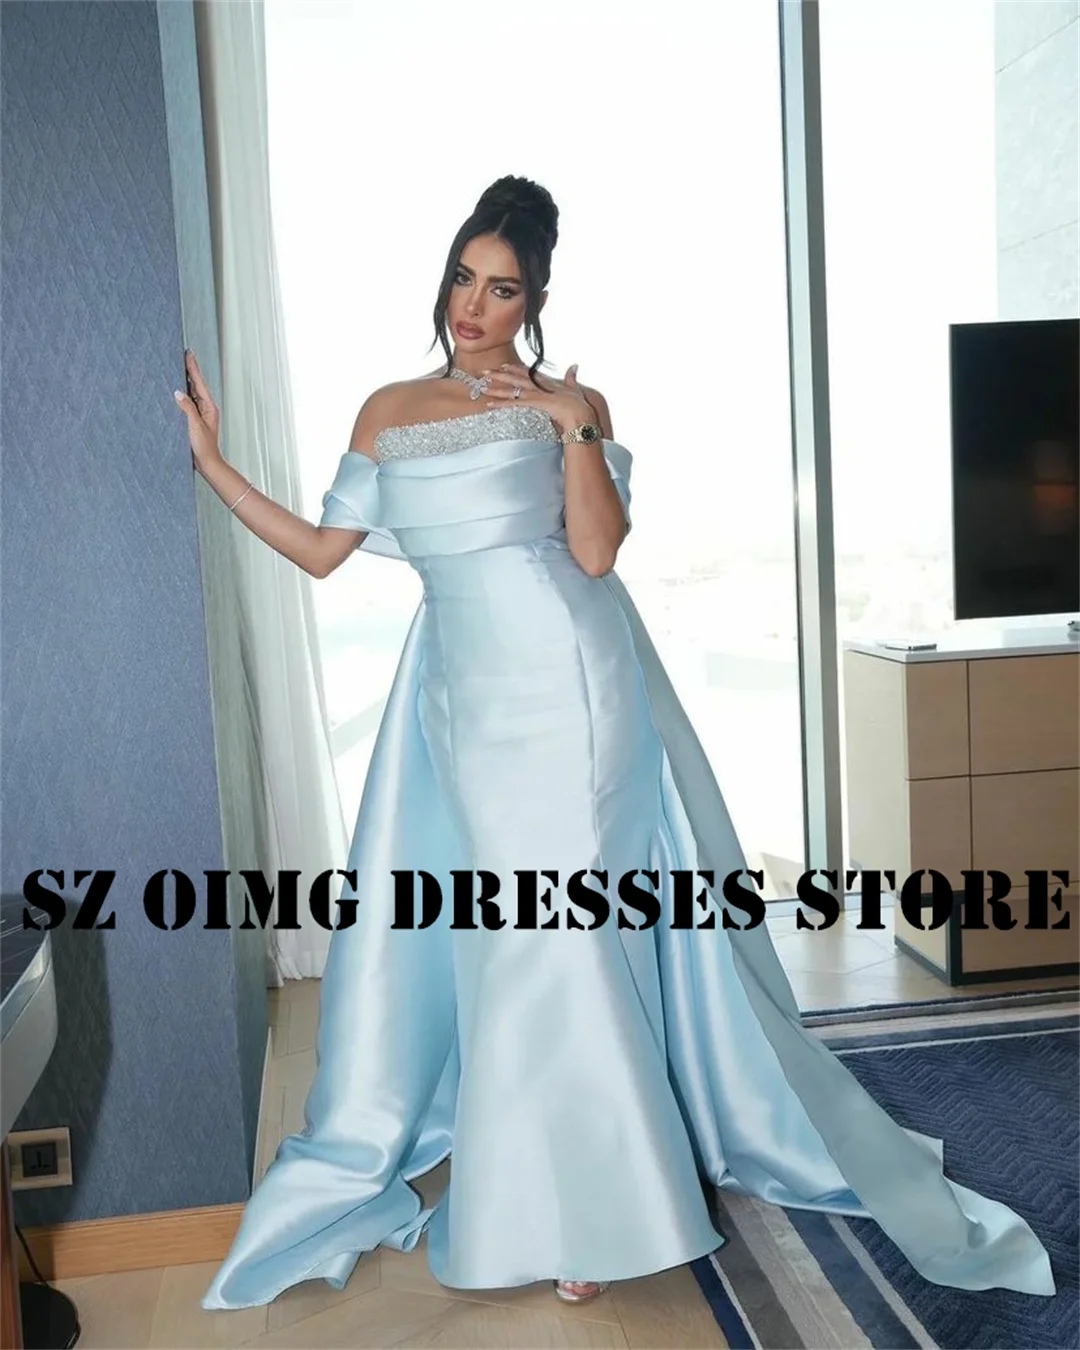 

OIMG New Design Satin Sequined Prom Dresses Arabic Women Ruched Off the Shoulder Sky Blue Evening Gowns Formal Party Dress